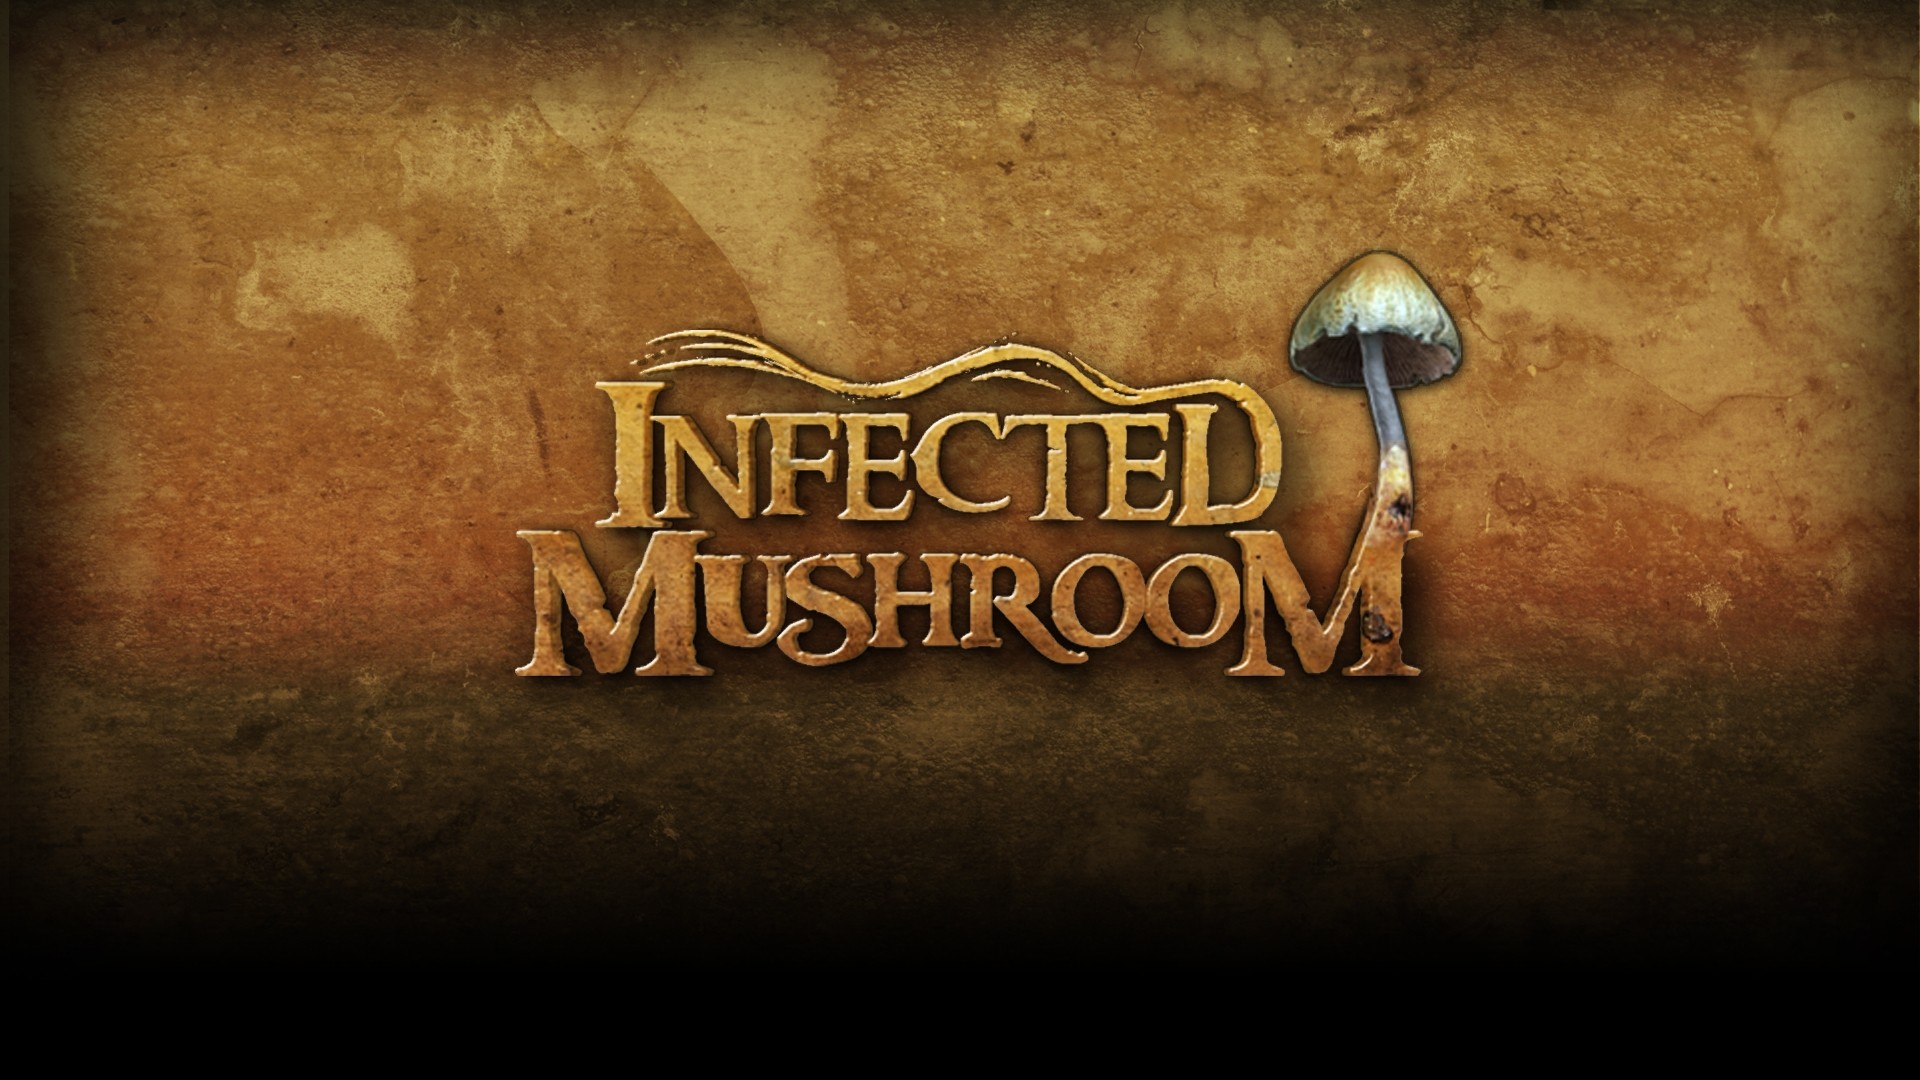 1920x1080 infected mushroom, letters, background